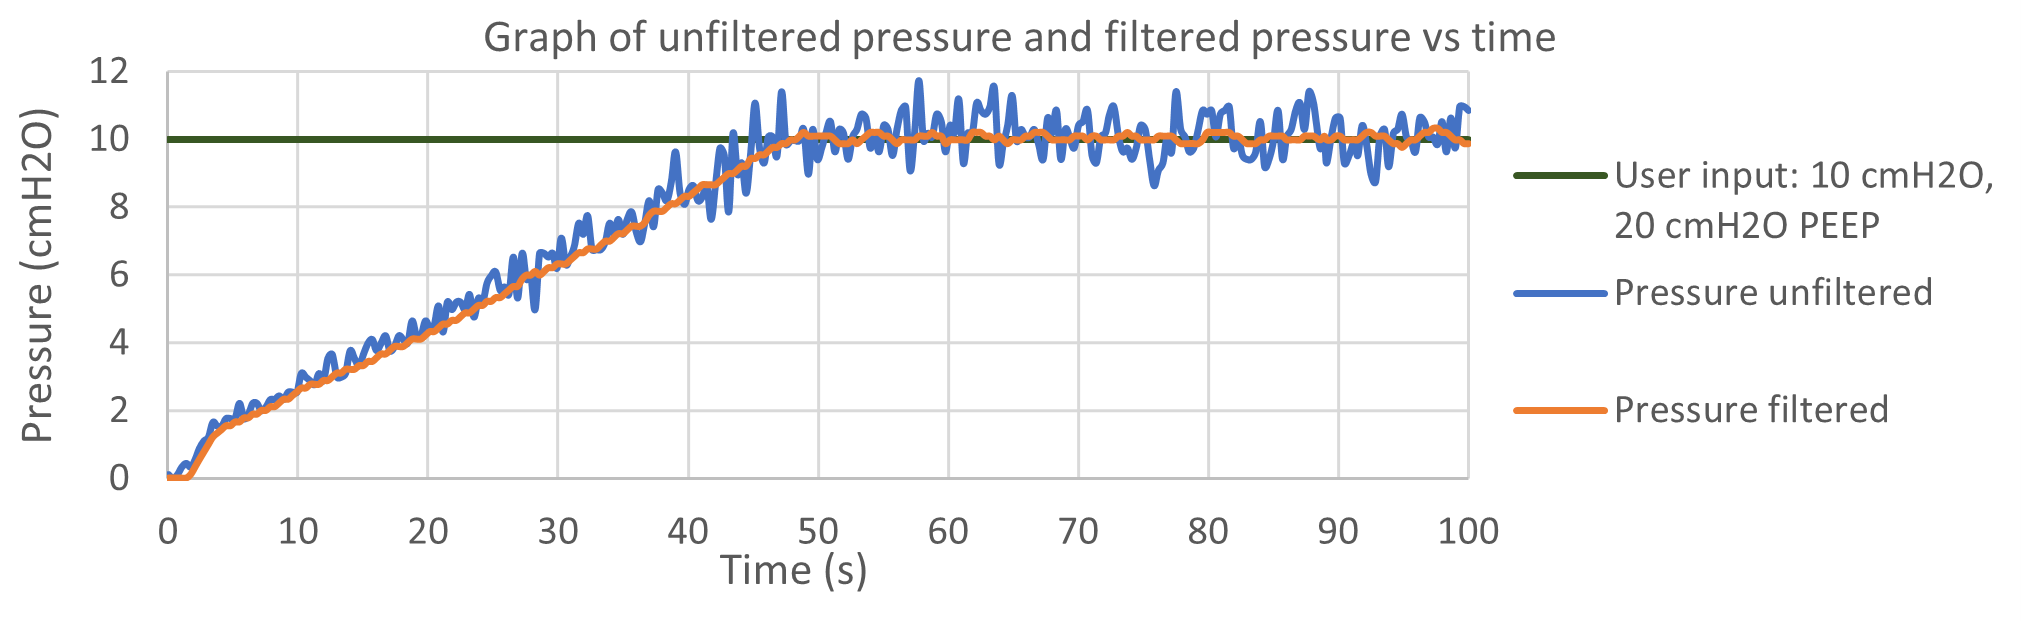 Figure 10: Unfiltered and filtered pressure vs time